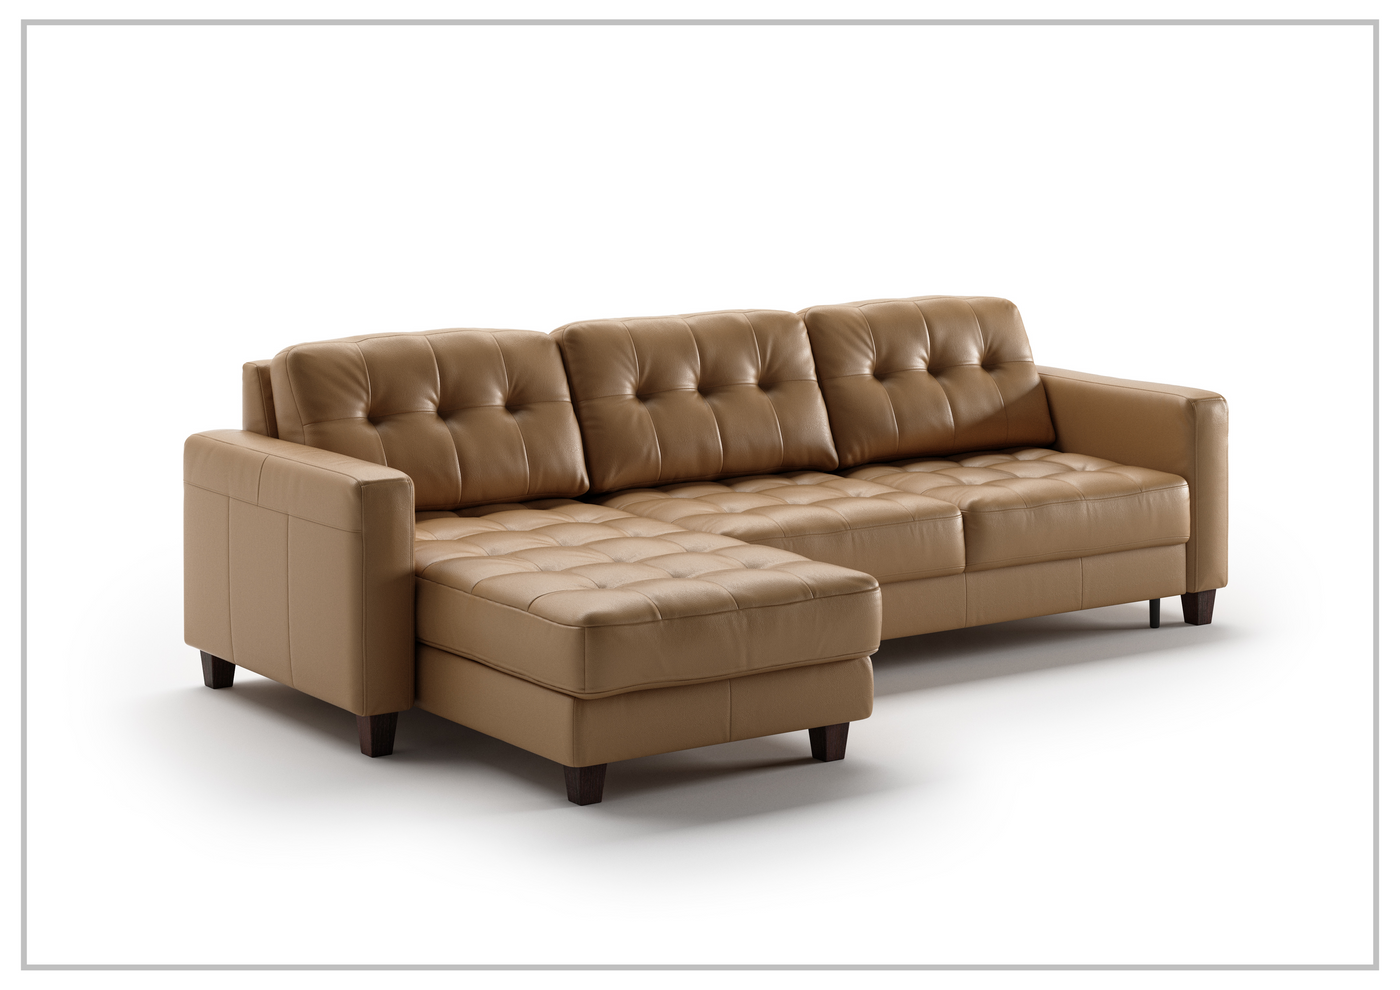 Luonto Noah L-shaped Sectional Sofa Sleeper with Reversible Chaise